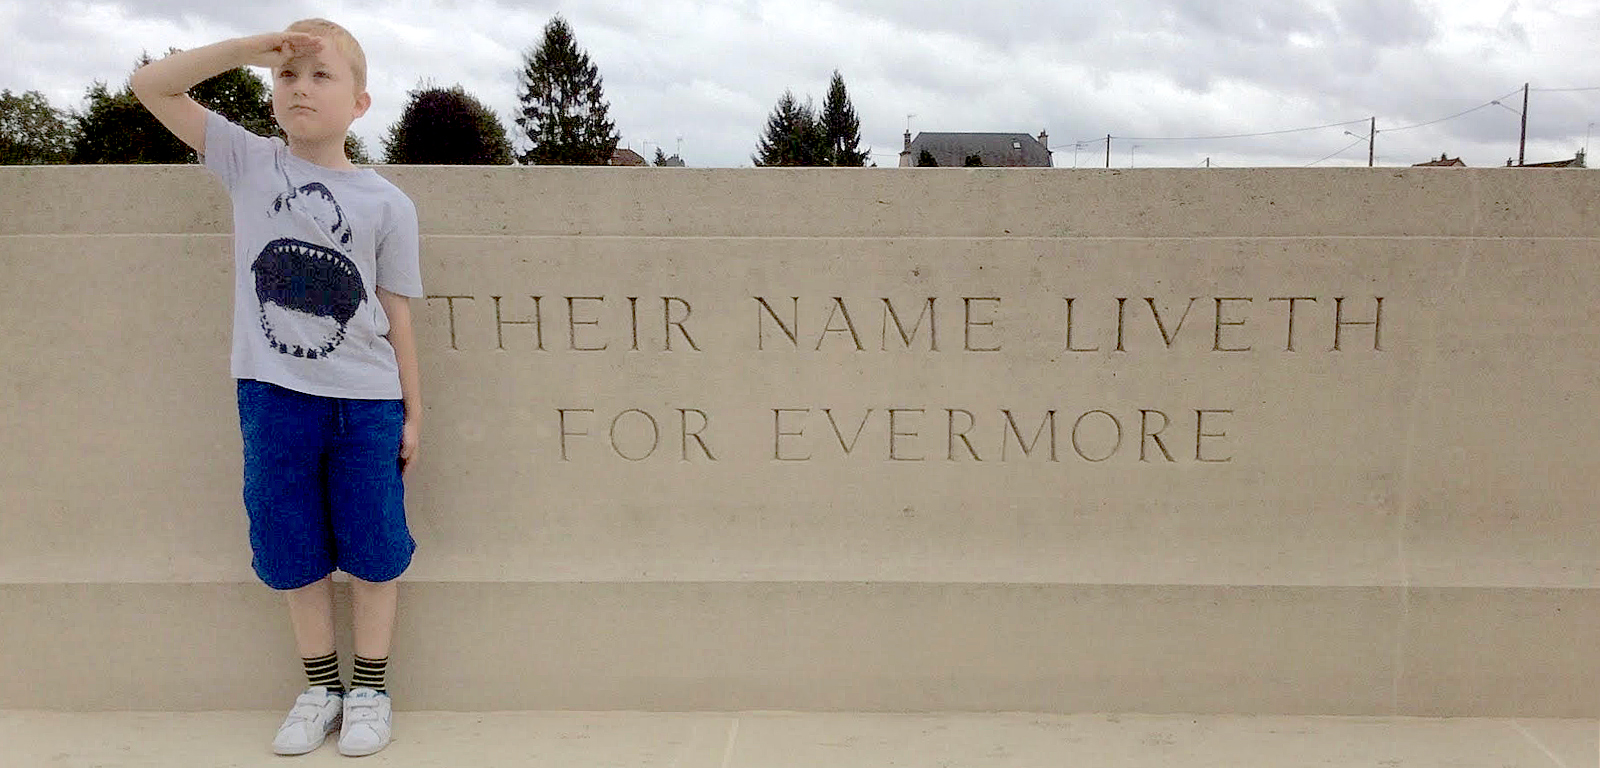 Young child saluting in front of a memorial stone with the inscription "Their names live for evermore"